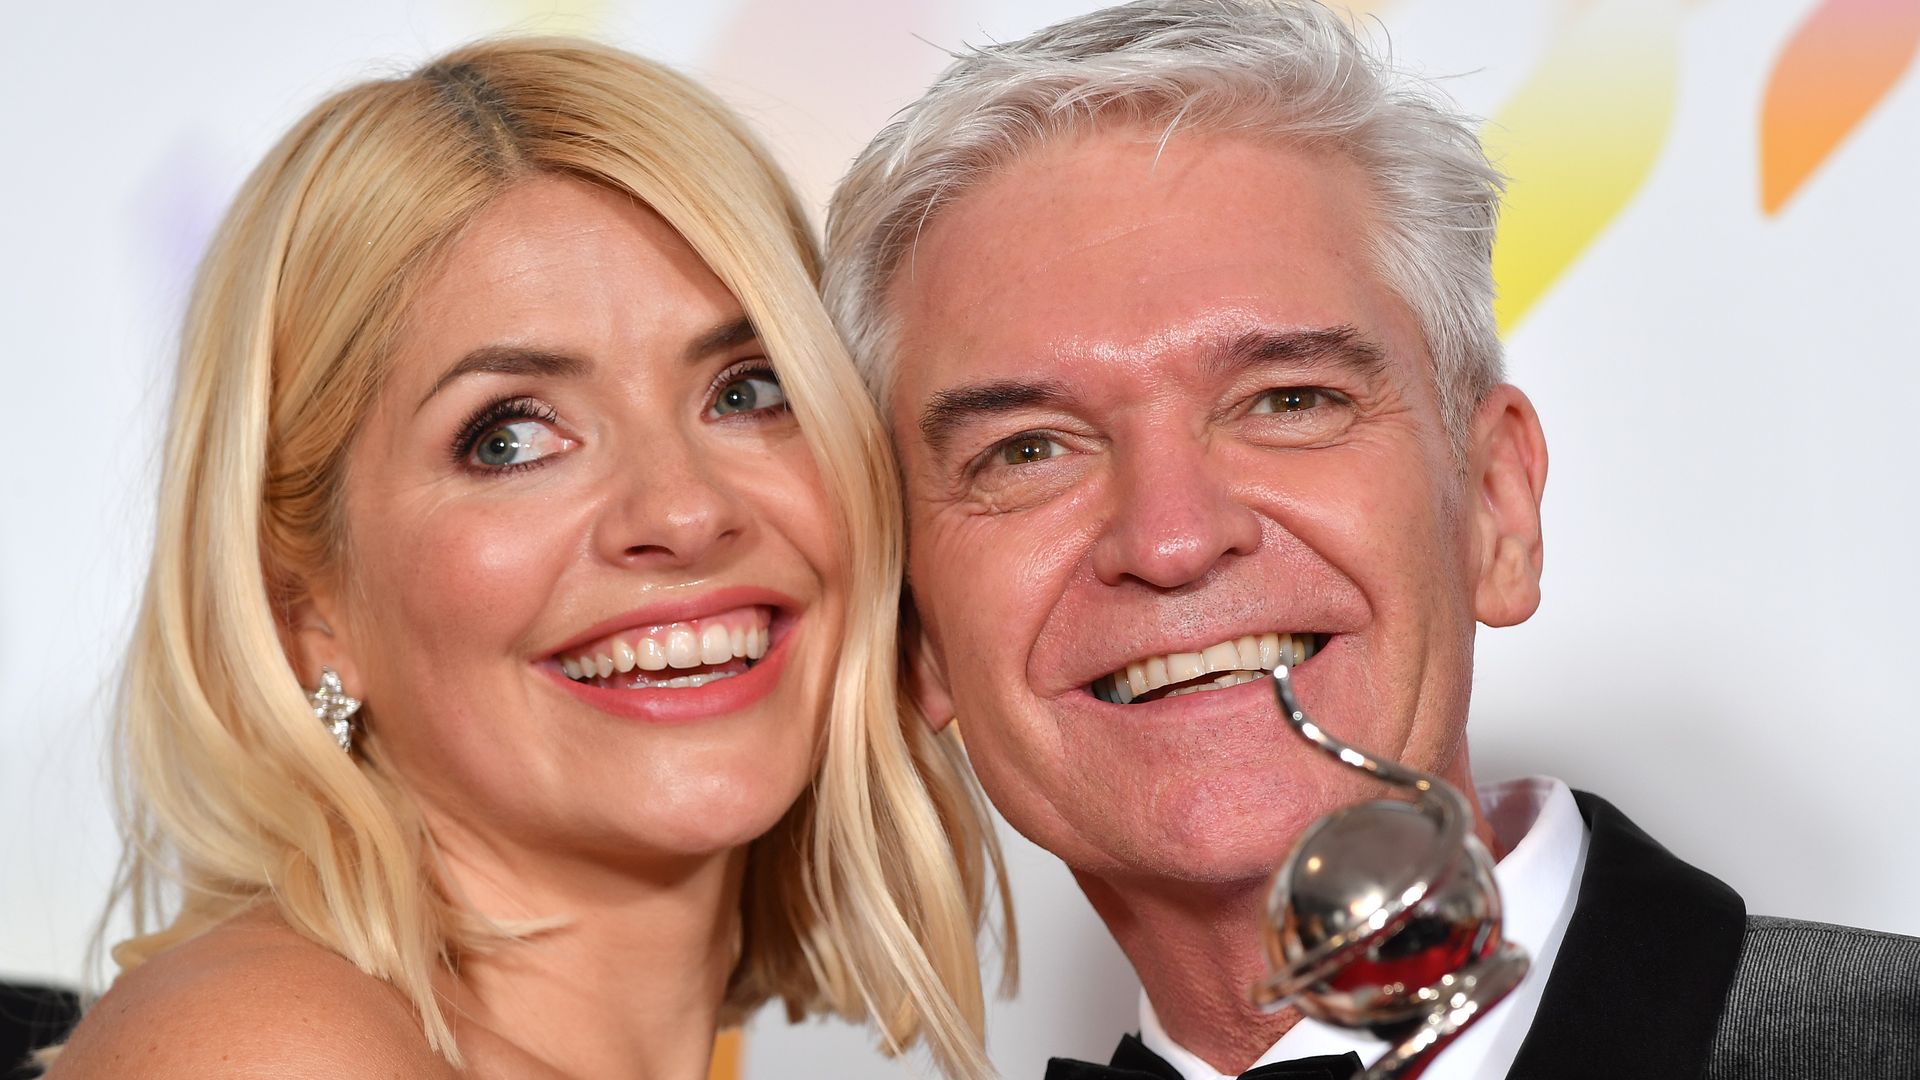 Holly Willoughby and Phillip Schofield pose with the award for Live Magazine Show for 'This Morning' in the winners room attends the National Television Awards 2020 at The O2 Arena on January 28, 2020 in London, England.